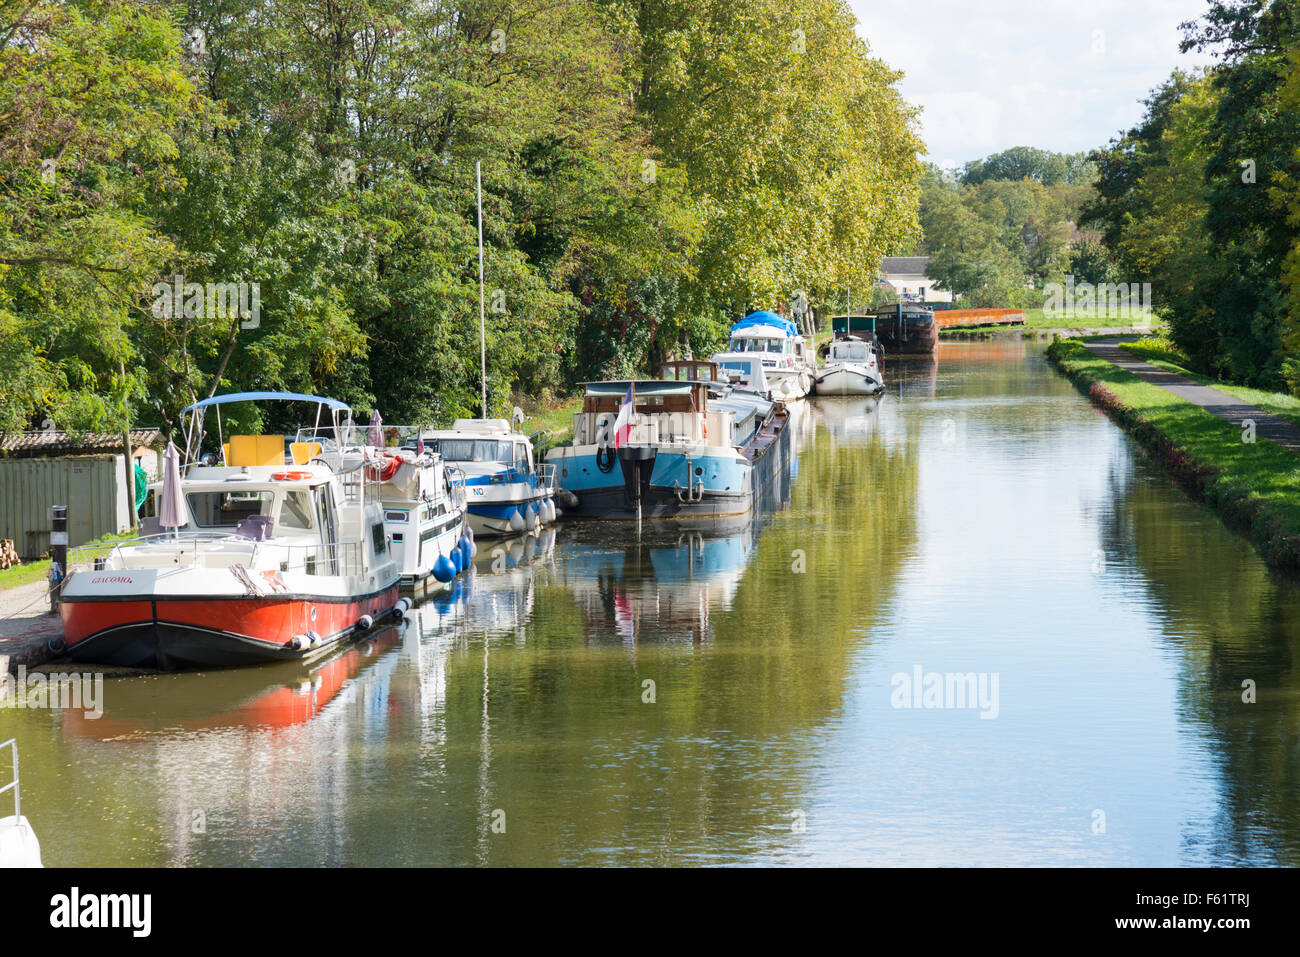 Boats moored on Le canal du centre, or central canal at Chagny France Stock Photo